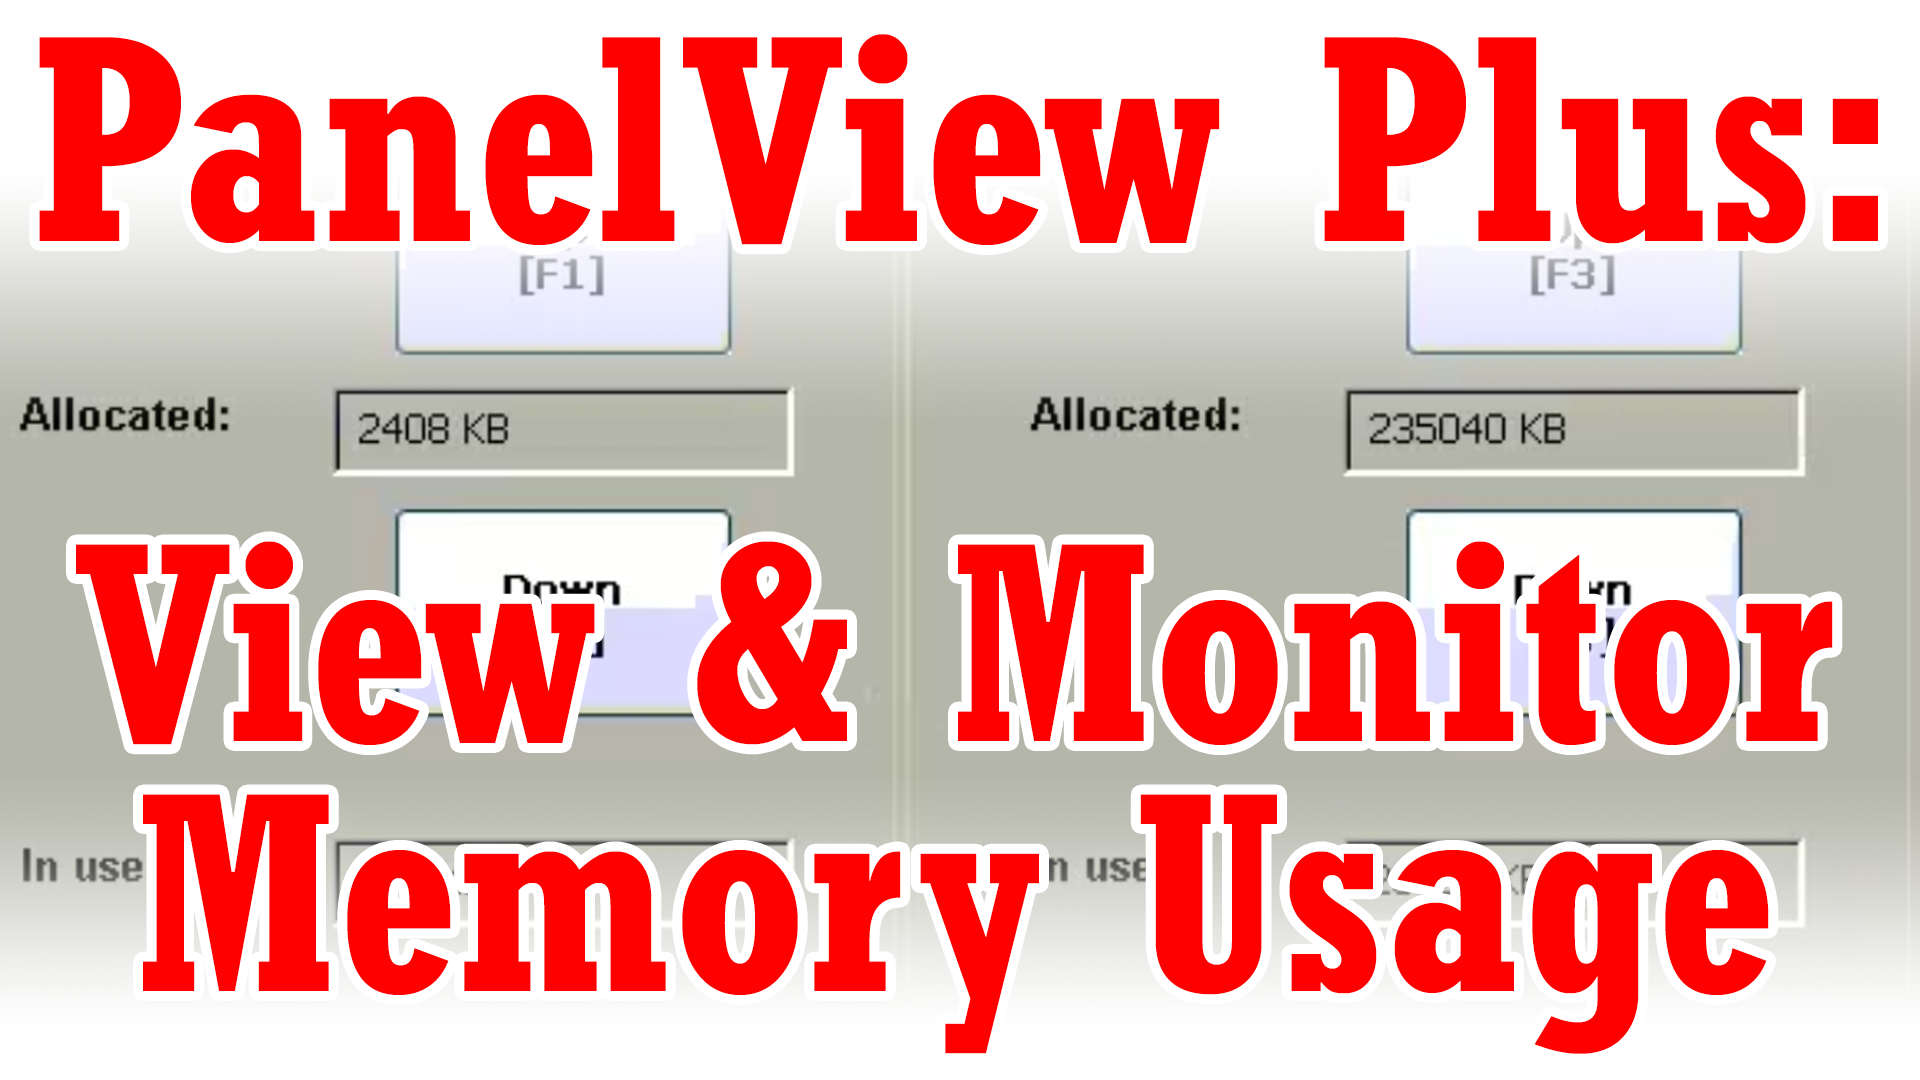 PanelView Plus - View and Monitor Memory Usage